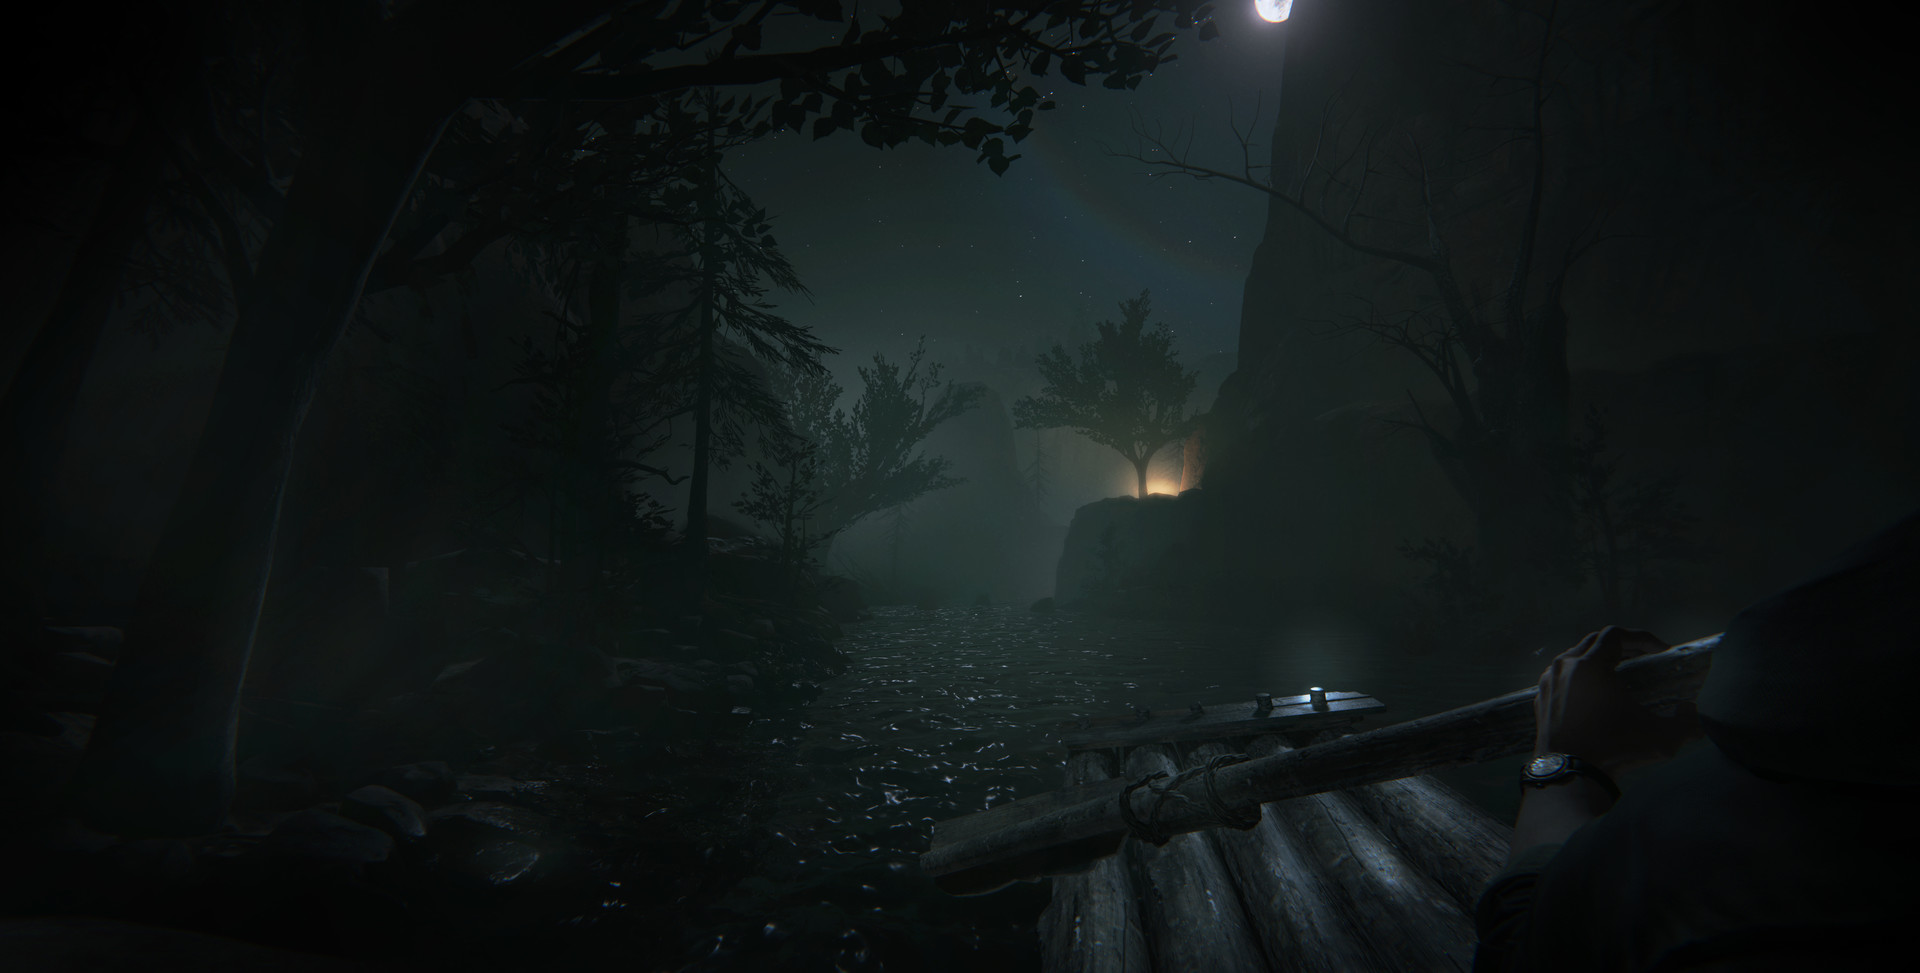 download new outlast for free